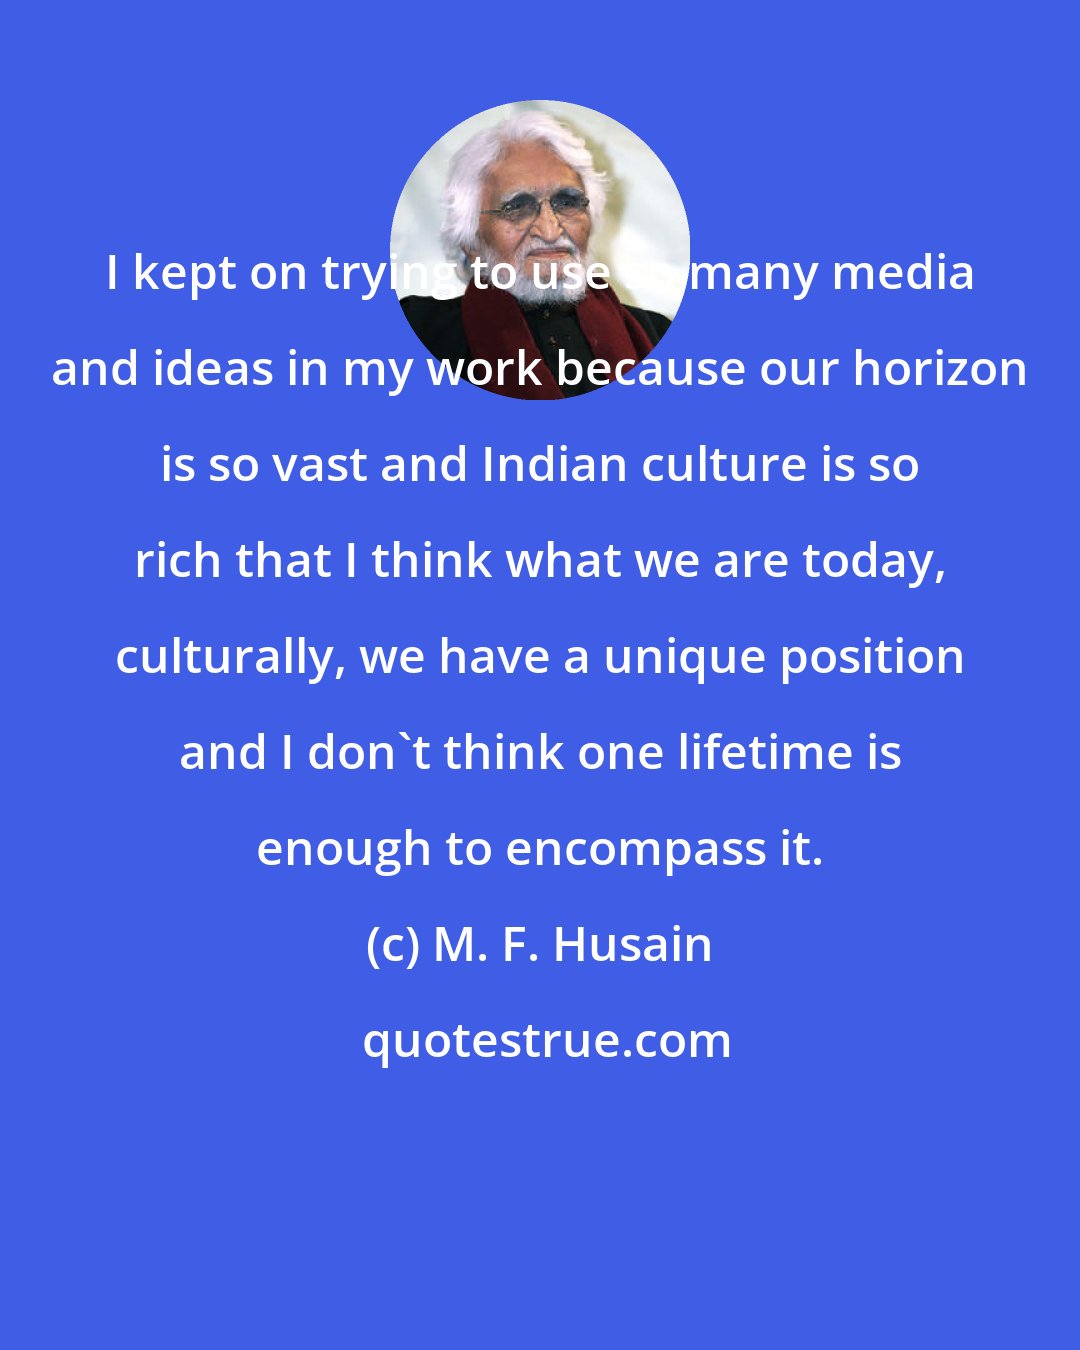 M. F. Husain: I kept on trying to use so many media and ideas in my work because our horizon is so vast and Indian culture is so rich that I think what we are today, culturally, we have a unique position and I don't think one lifetime is enough to encompass it.